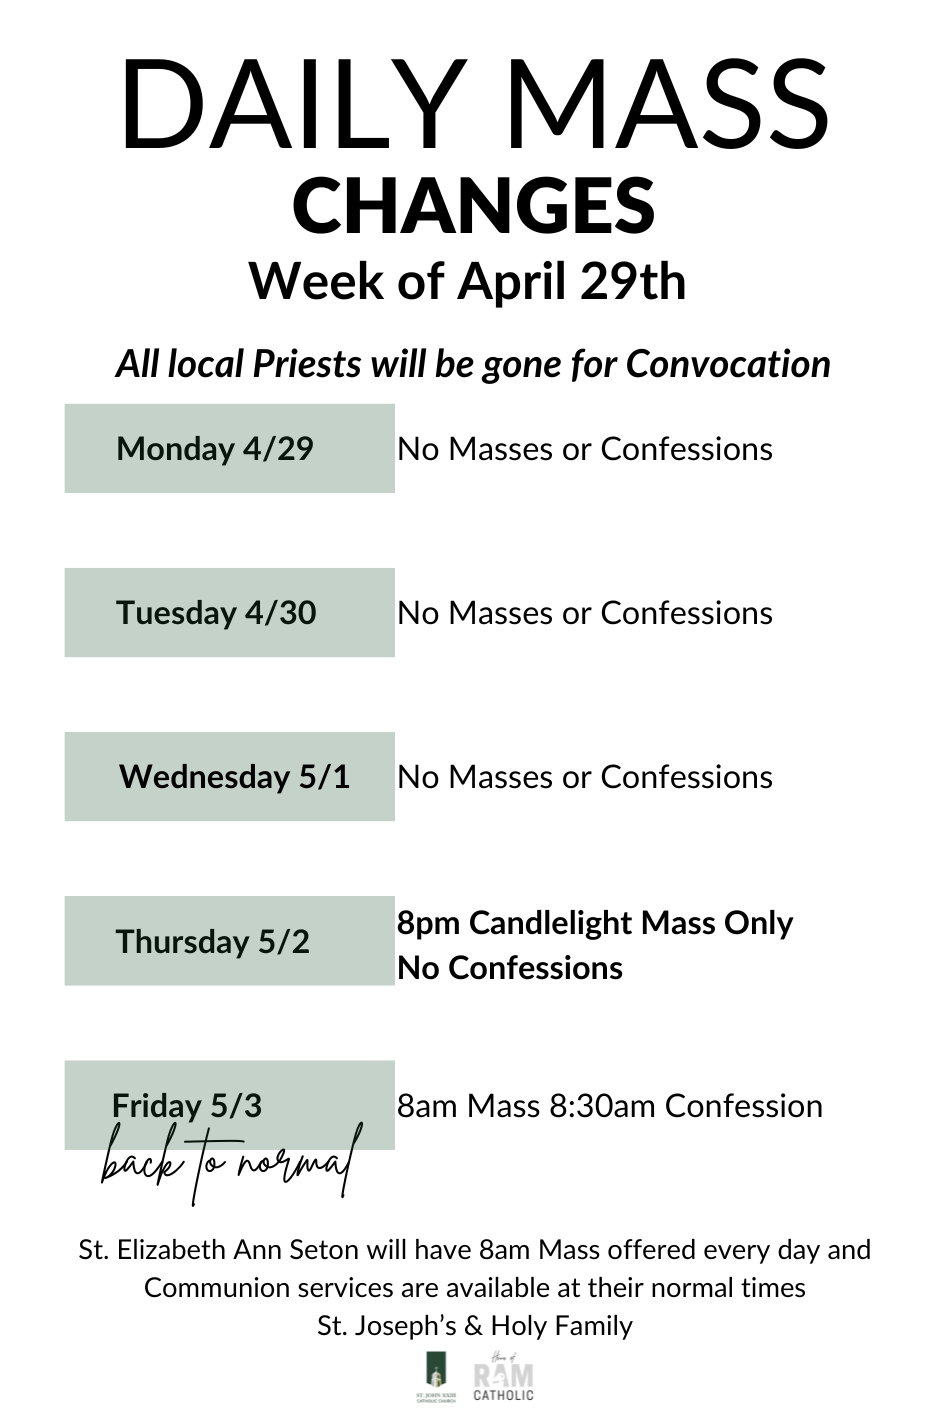 All Priests will be gone for the Convocation (400 x 600 px)